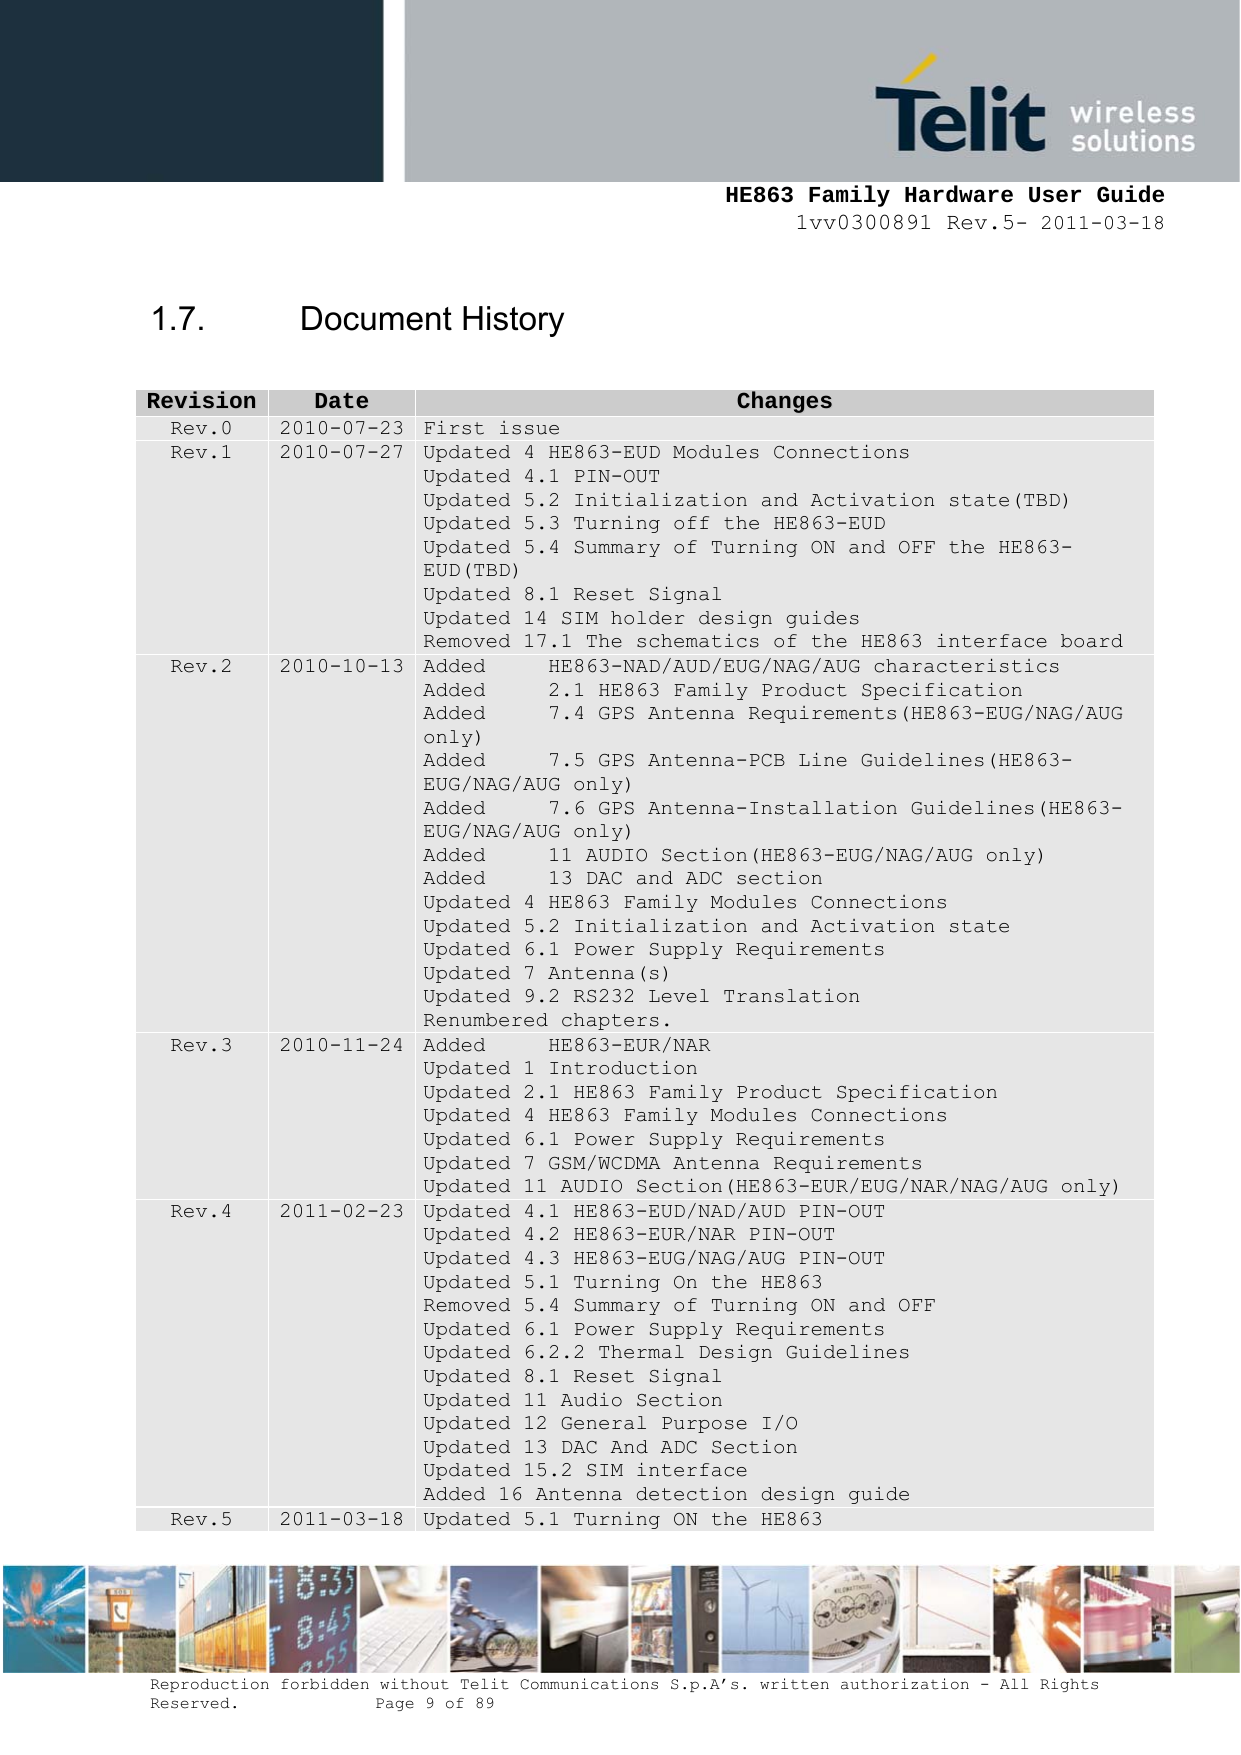     HE863 Family Hardware User Guide 1vv0300891 Rev.5- 2011-03-18    Reproduction forbidden without Telit Communications S.p.A’s. written authorization - All Rights Reserved.    Page 9 of 89  1.7. Document History  RReevviissiioonn  DDaattee CChhaannggeess Rev.0  2010-07-23  First issue Rev.1  2010-07-27  Updated 4 HE863-EUD Modules Connections Updated 4.1 PIN-OUT Updated 5.2 Initialization and Activation state(TBD) Updated 5.3 Turning off the HE863-EUD Updated 5.4 Summary of Turning ON and OFF the HE863-EUD(TBD) Updated 8.1 Reset Signal Updated 14 SIM holder design guides Removed 17.1 The schematics of the HE863 interface board Rev.2  2010-10-13  Added     HE863-NAD/AUD/EUG/NAG/AUG characteristics Added     2.1 HE863 Family Product Specification Added     7.4 GPS Antenna Requirements(HE863-EUG/NAG/AUG only) Added     7.5 GPS Antenna-PCB Line Guidelines(HE863-EUG/NAG/AUG only) Added     7.6 GPS Antenna-Installation Guidelines(HE863-EUG/NAG/AUG only) Added     11 AUDIO Section(HE863-EUG/NAG/AUG only) Added     13 DAC and ADC section Updated 4 HE863 Family Modules Connections Updated 5.2 Initialization and Activation state Updated 6.1 Power Supply Requirements Updated 7 Antenna(s) Updated 9.2 RS232 Level Translation Renumbered chapters. Rev.3  2010-11-24  Added     HE863-EUR/NAR Updated 1 Introduction Updated 2.1 HE863 Family Product Specification Updated 4 HE863 Family Modules Connections Updated 6.1 Power Supply Requirements Updated 7 GSM/WCDMA Antenna Requirements Updated 11 AUDIO Section(HE863-EUR/EUG/NAR/NAG/AUG only) Rev.4  2011-02-23  Updated 4.1 HE863-EUD/NAD/AUD PIN-OUT Updated 4.2 HE863-EUR/NAR PIN-OUT Updated 4.3 HE863-EUG/NAG/AUG PIN-OUT Updated 5.1 Turning On the HE863 Removed 5.4 Summary of Turning ON and OFF Updated 6.1 Power Supply Requirements Updated 6.2.2 Thermal Design Guidelines Updated 8.1 Reset Signal Updated 11 Audio Section Updated 12 General Purpose I/O Updated 13 DAC And ADC Section Updated 15.2 SIM interface Added 16 Antenna detection design guide Rev.5  2011-03-18  Updated 5.1 Turning ON the HE863 